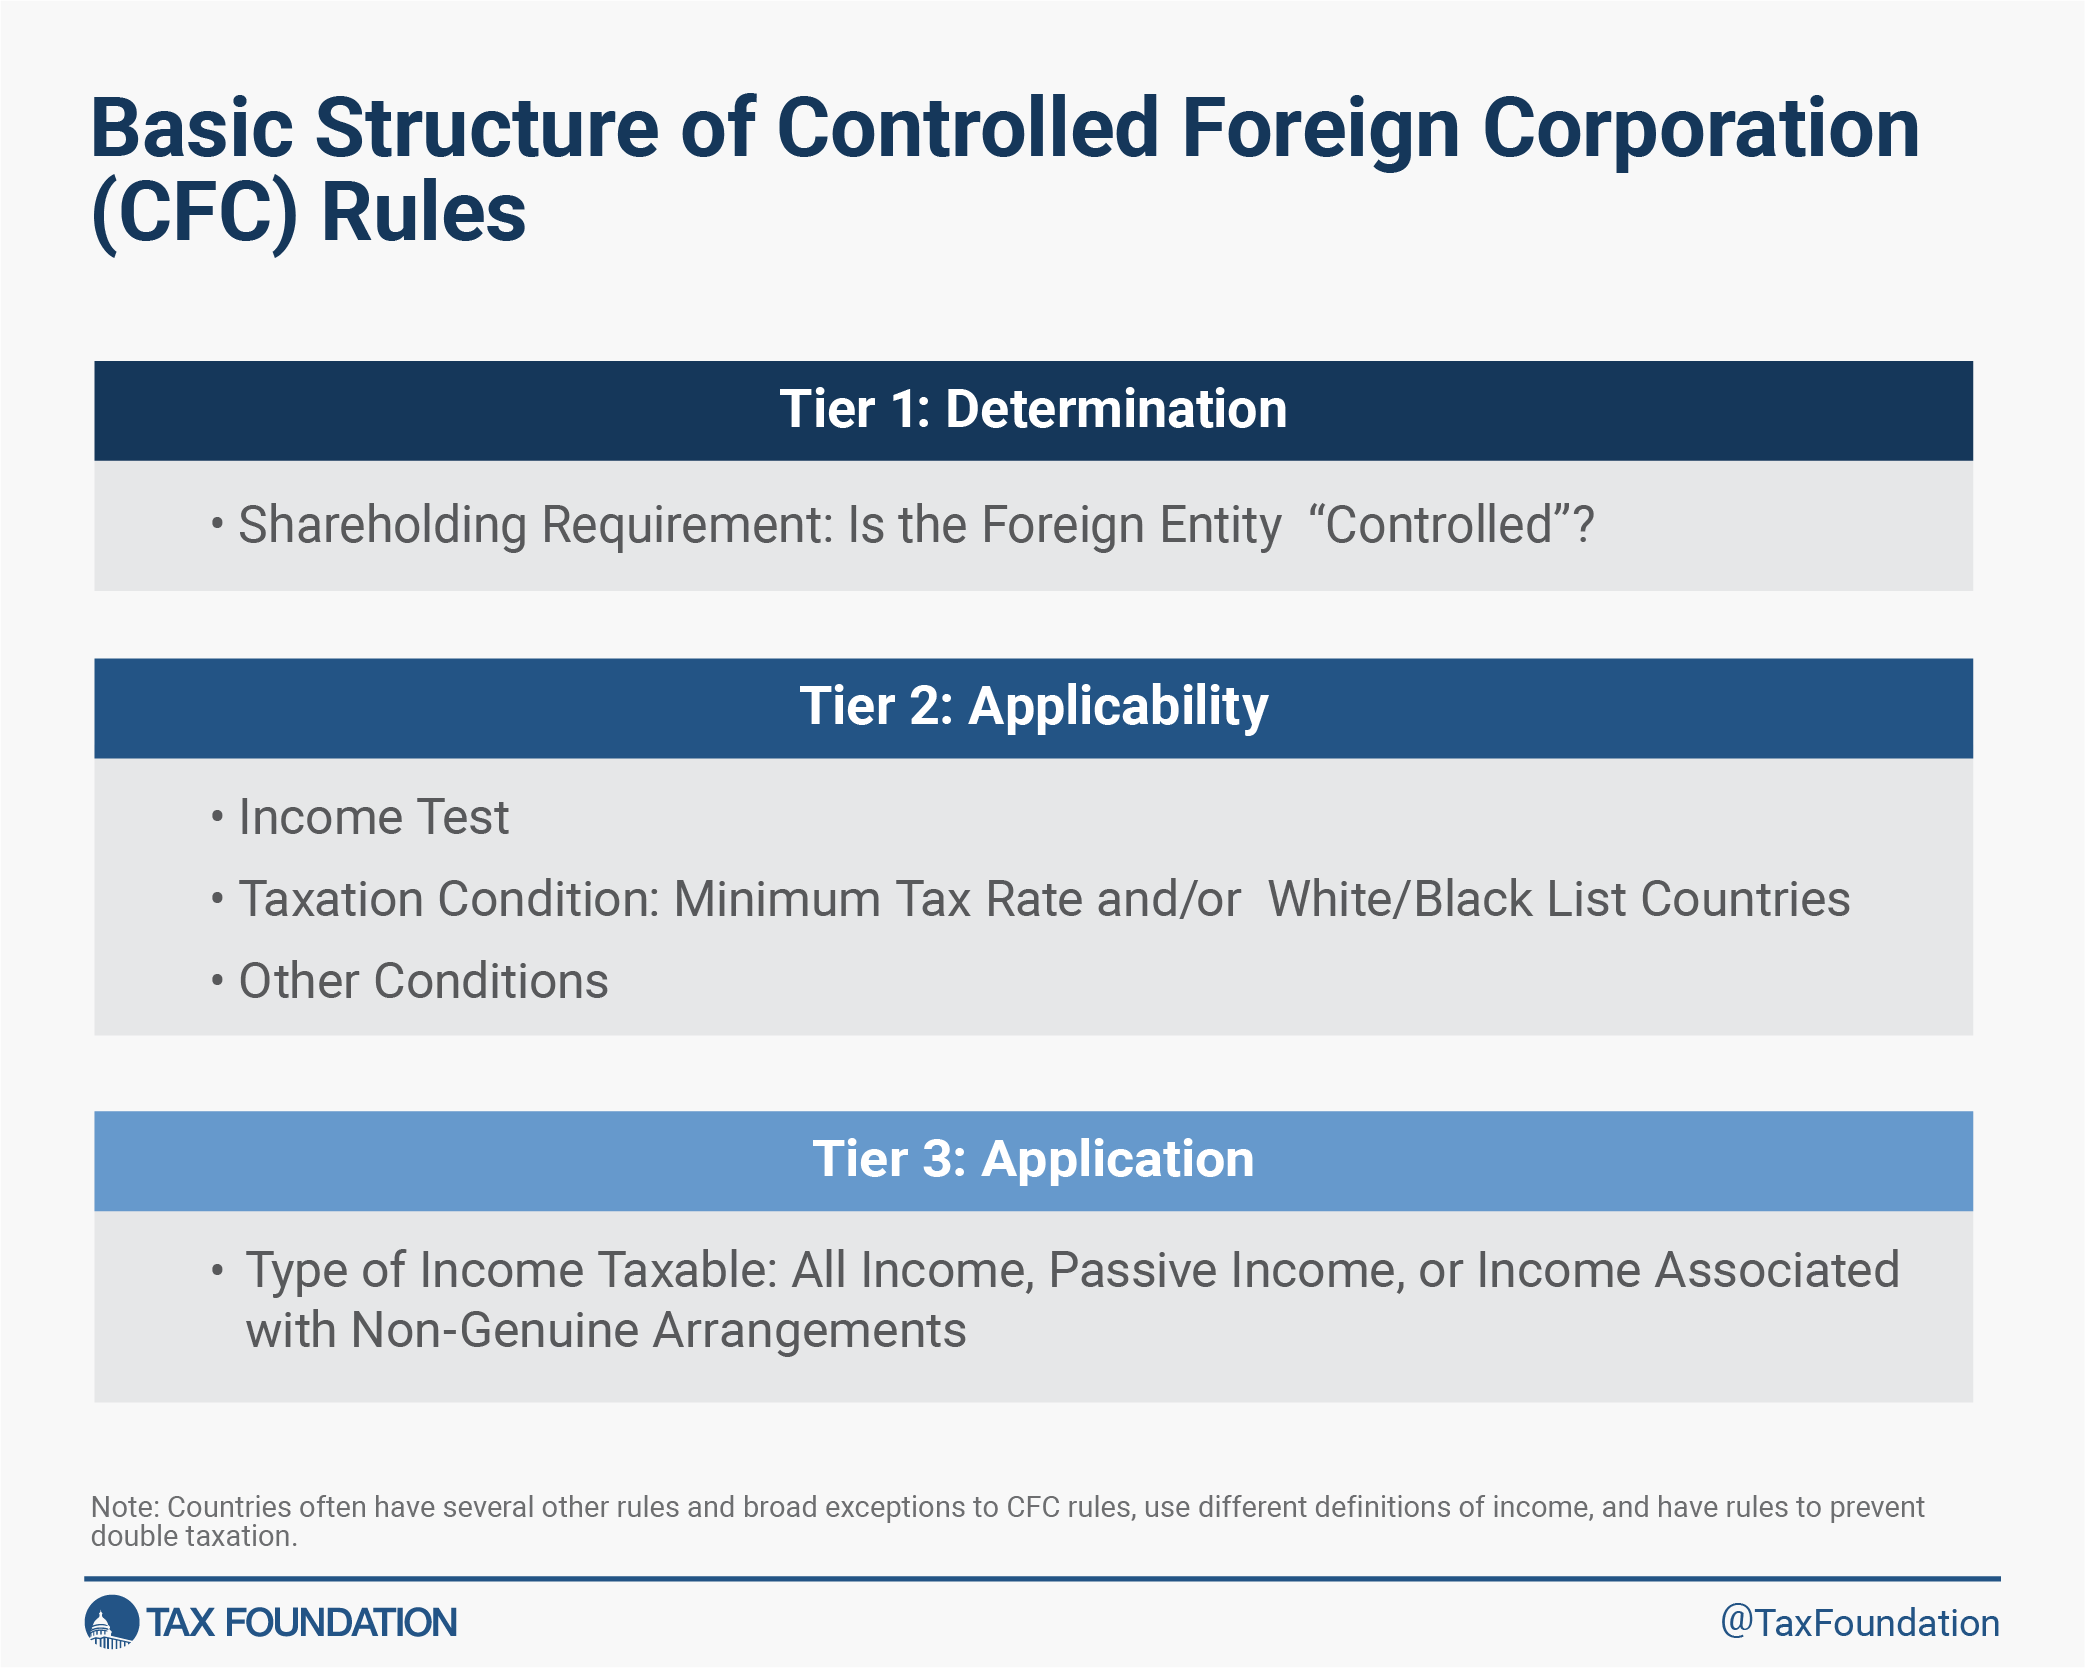 Basic Structure of Controlled Foreign Corporation CFC Rules